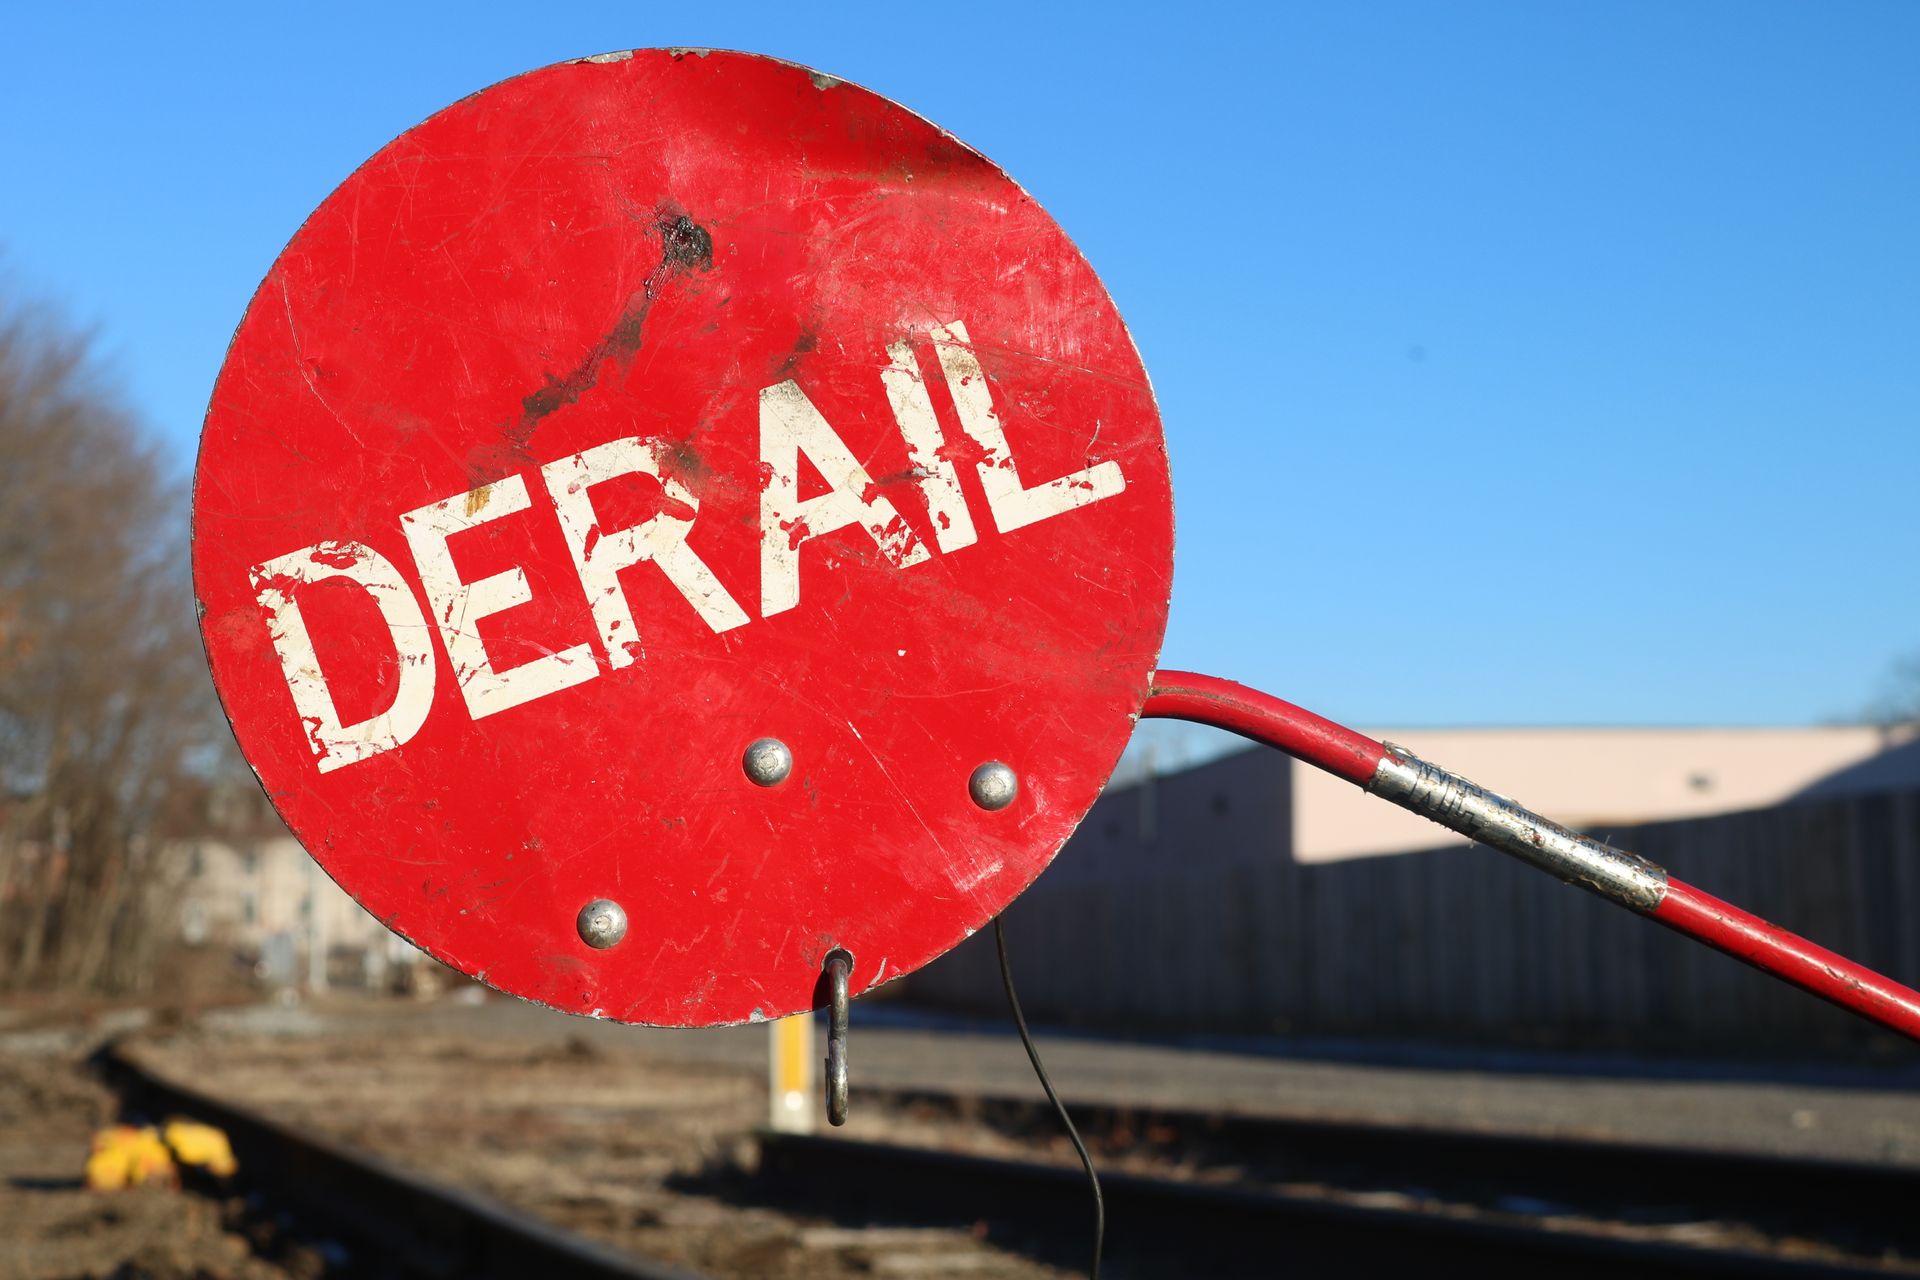 red derail sign for trains